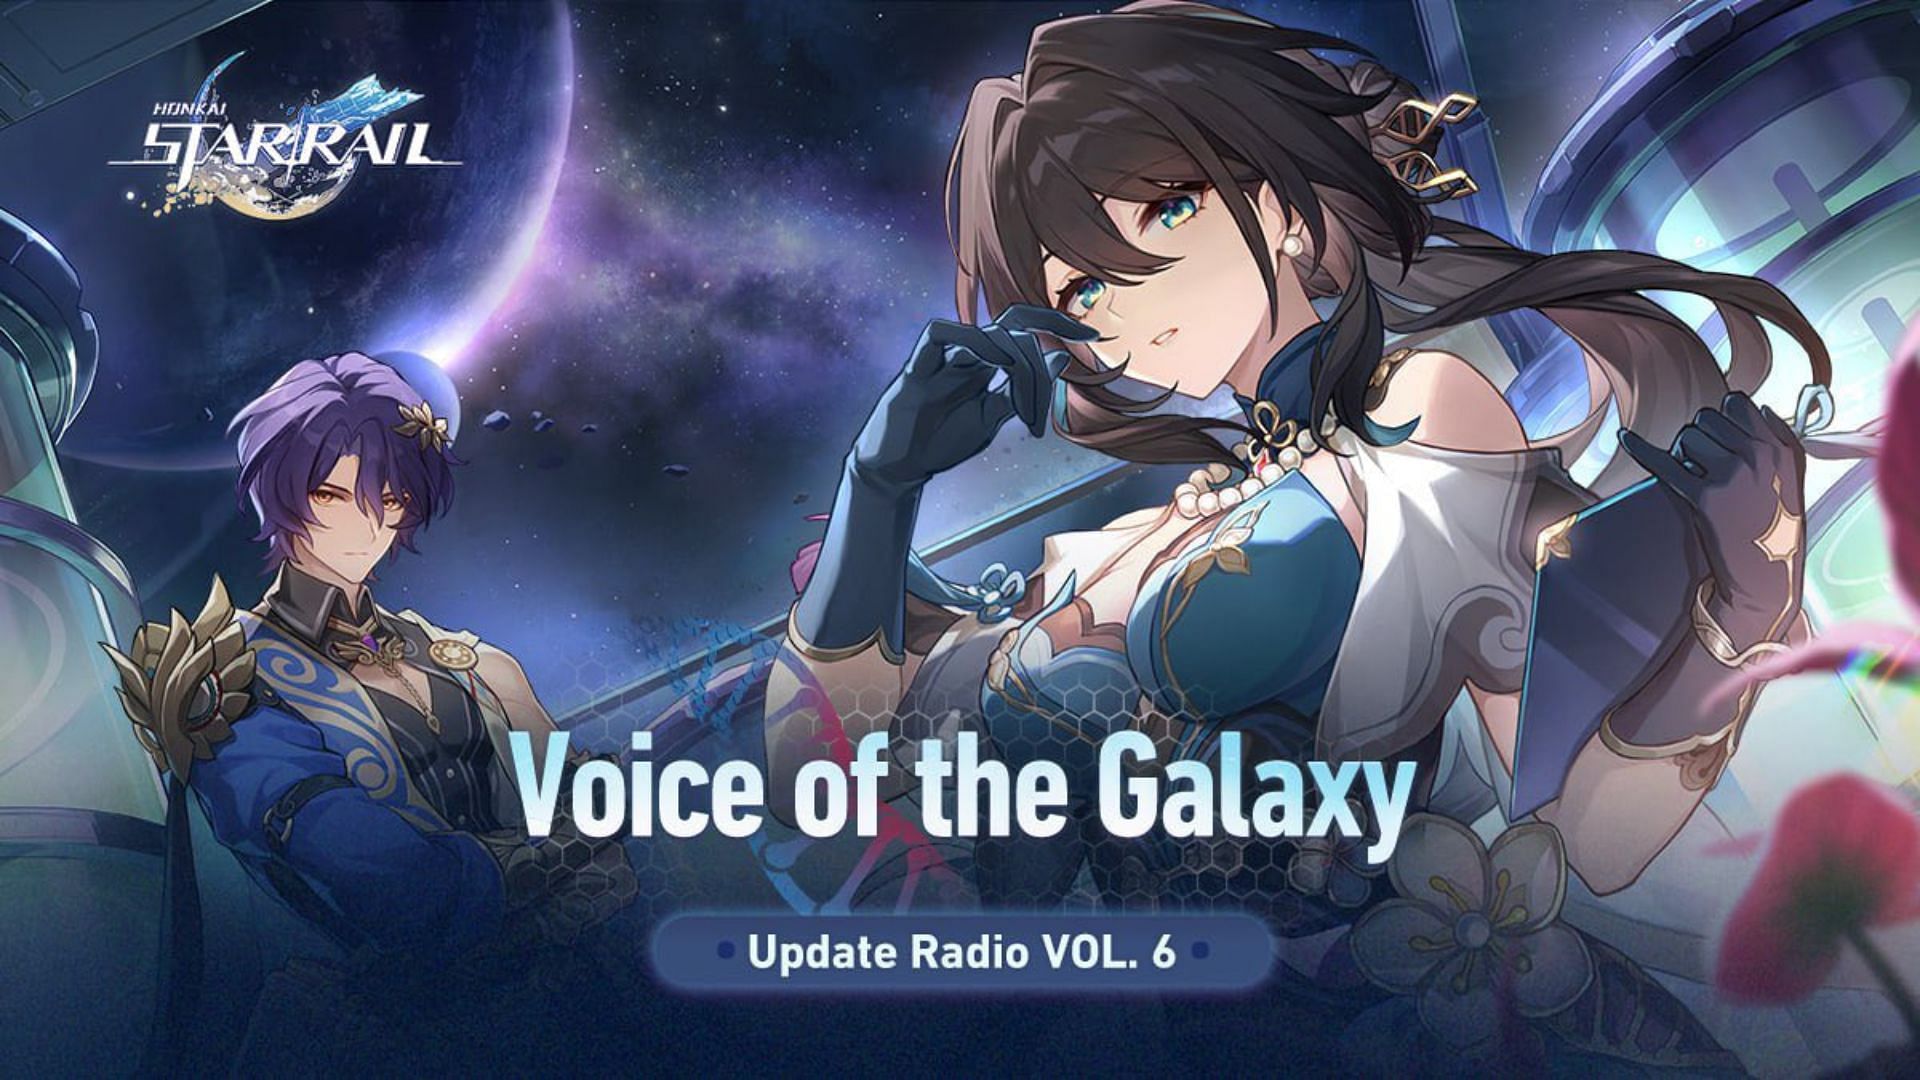 Official artwork of Voice of the Galaxy Vol. 6 